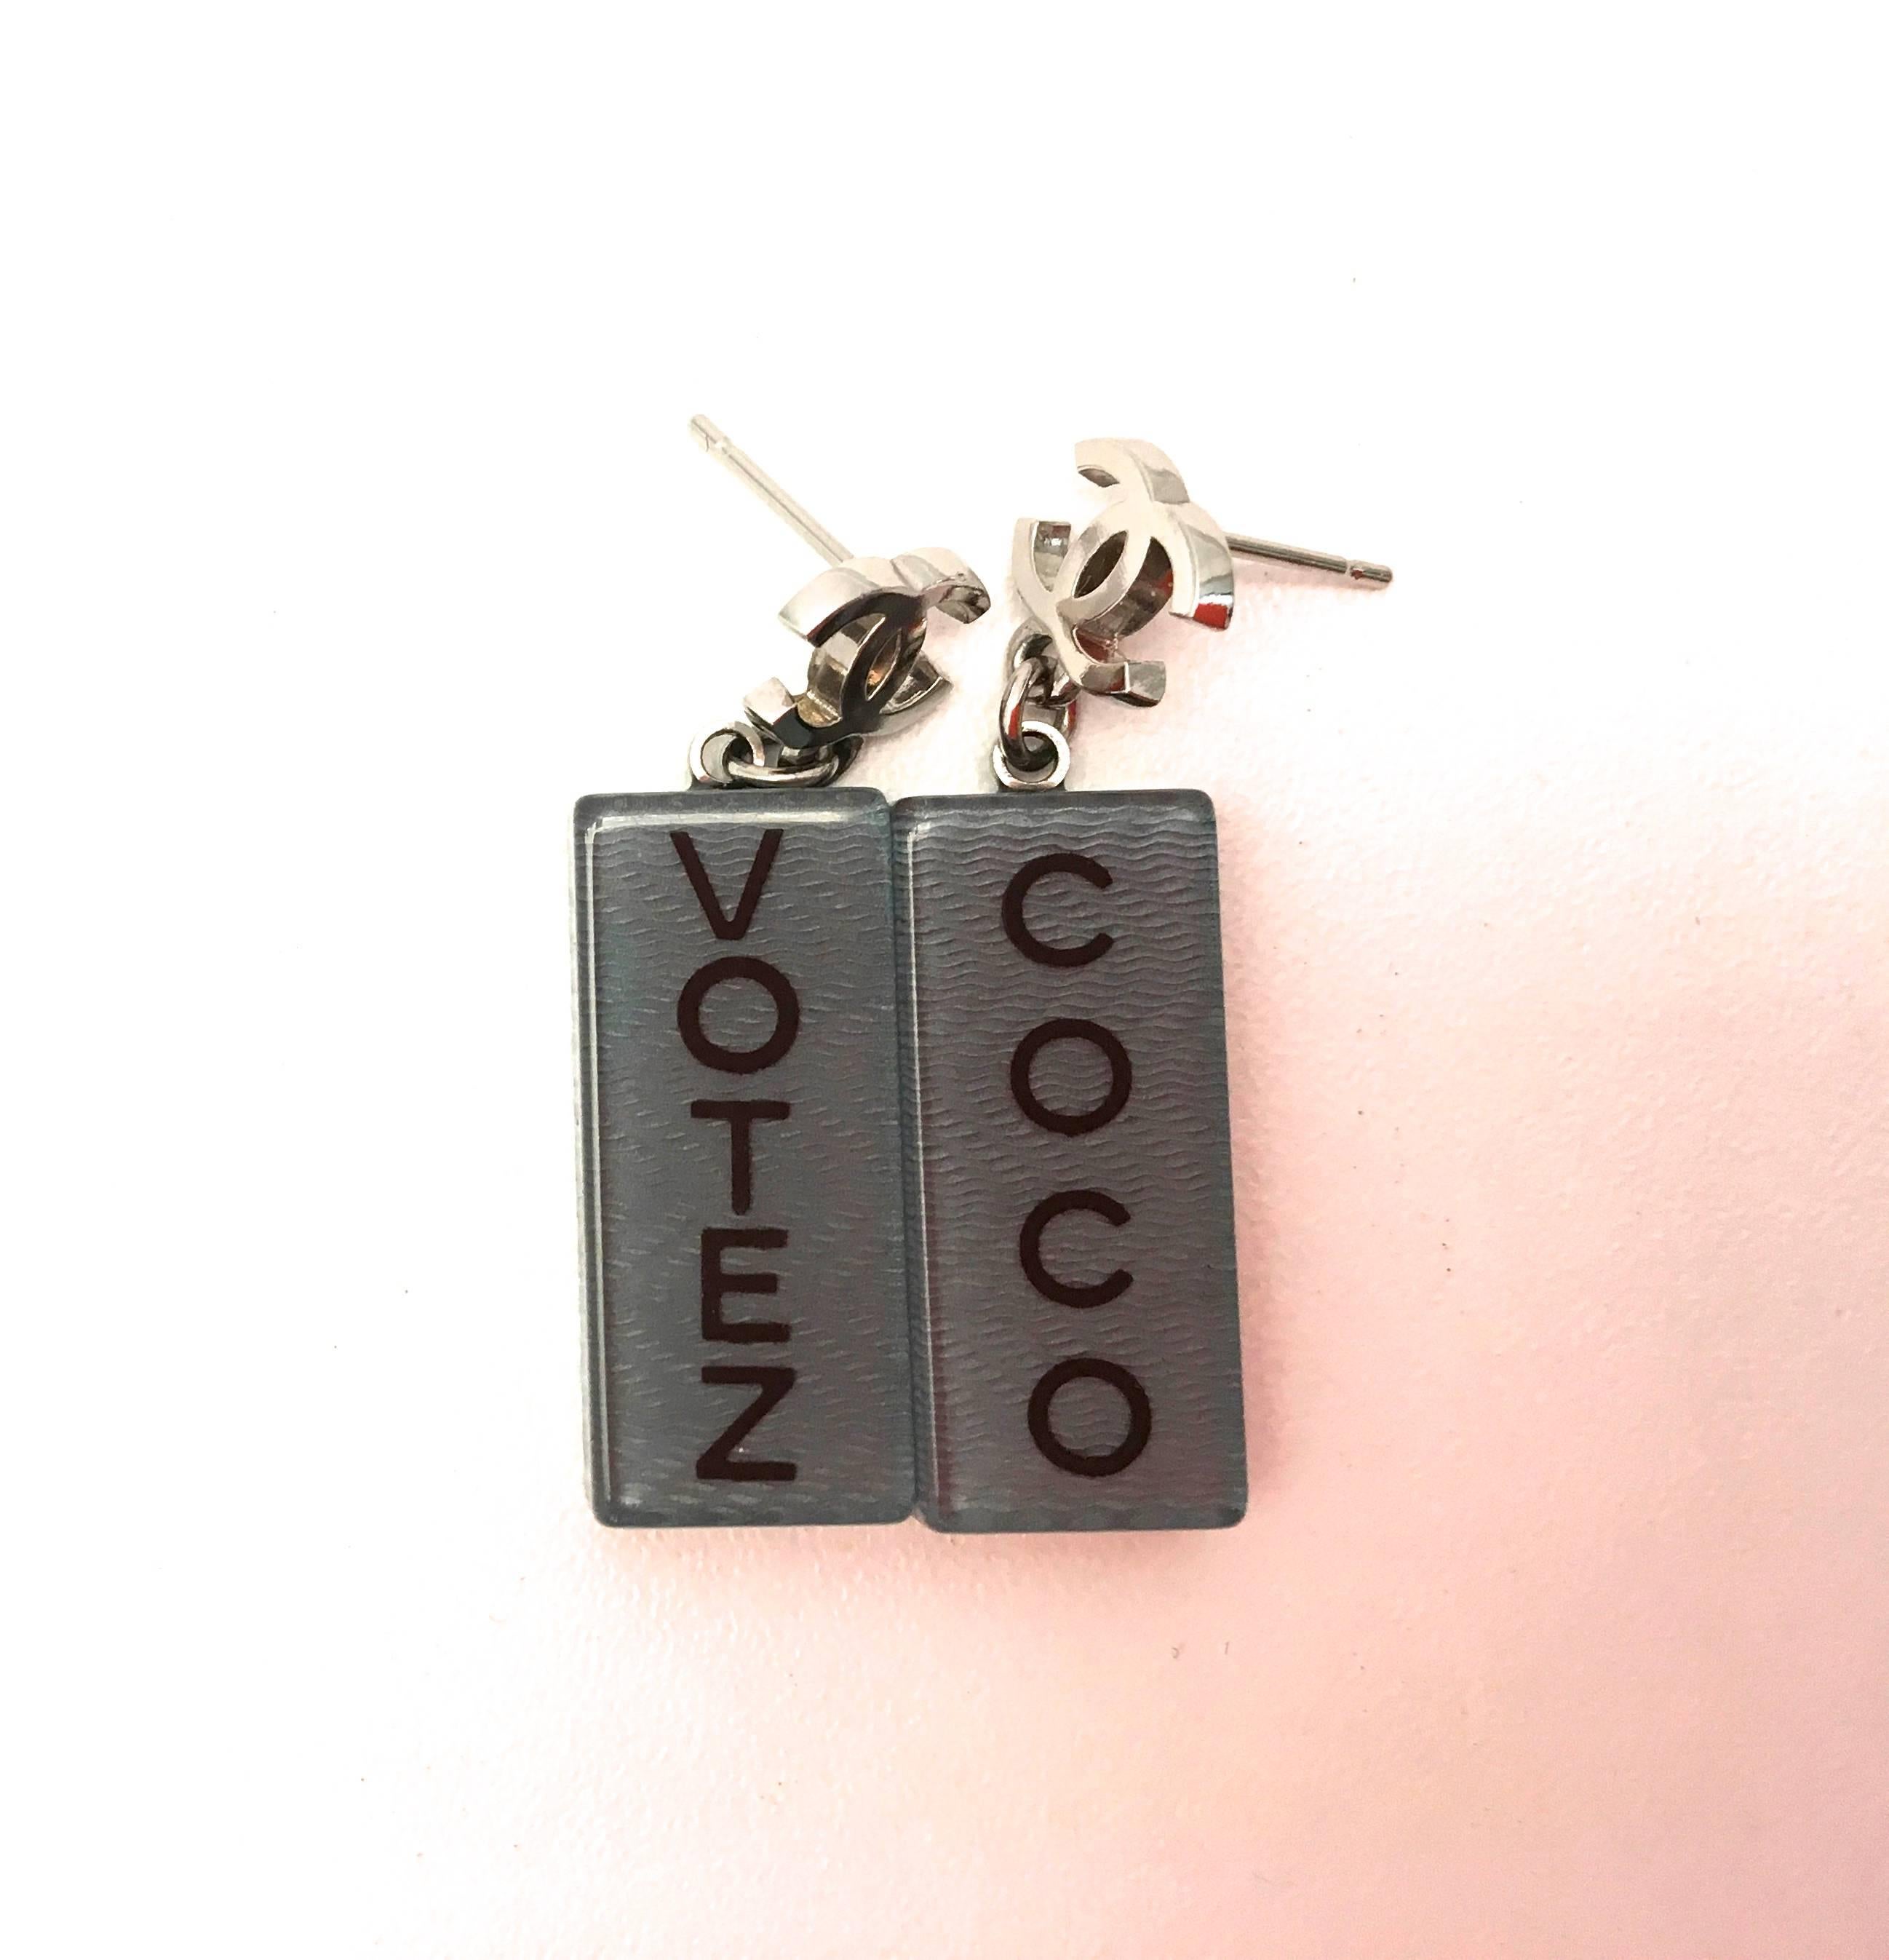 New Chanel Lucite Earrings - 'Votez Coco' - 2015 3